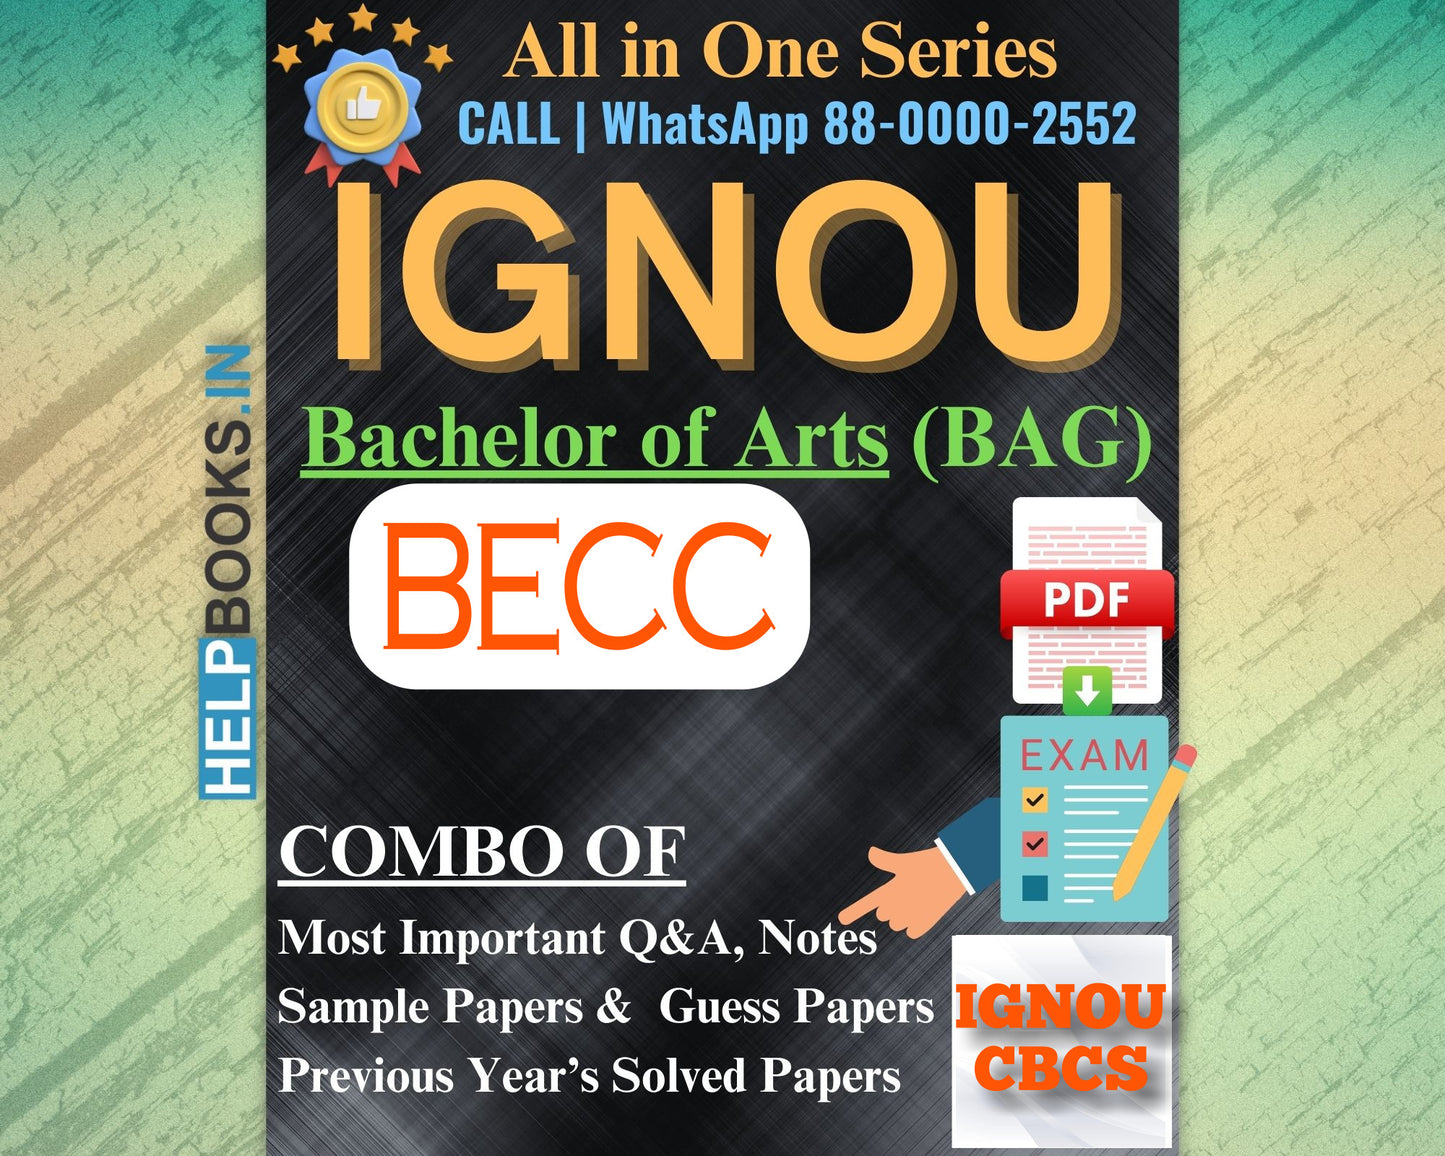 IGNOU BAG Online Study Package: Bachelor of Arts (BA) - Previous Year’s Solved Papers, Q&A, Exam Notes, Sample Papers, Guess Papers-BECC131, BECC132, BECC133, BECC134